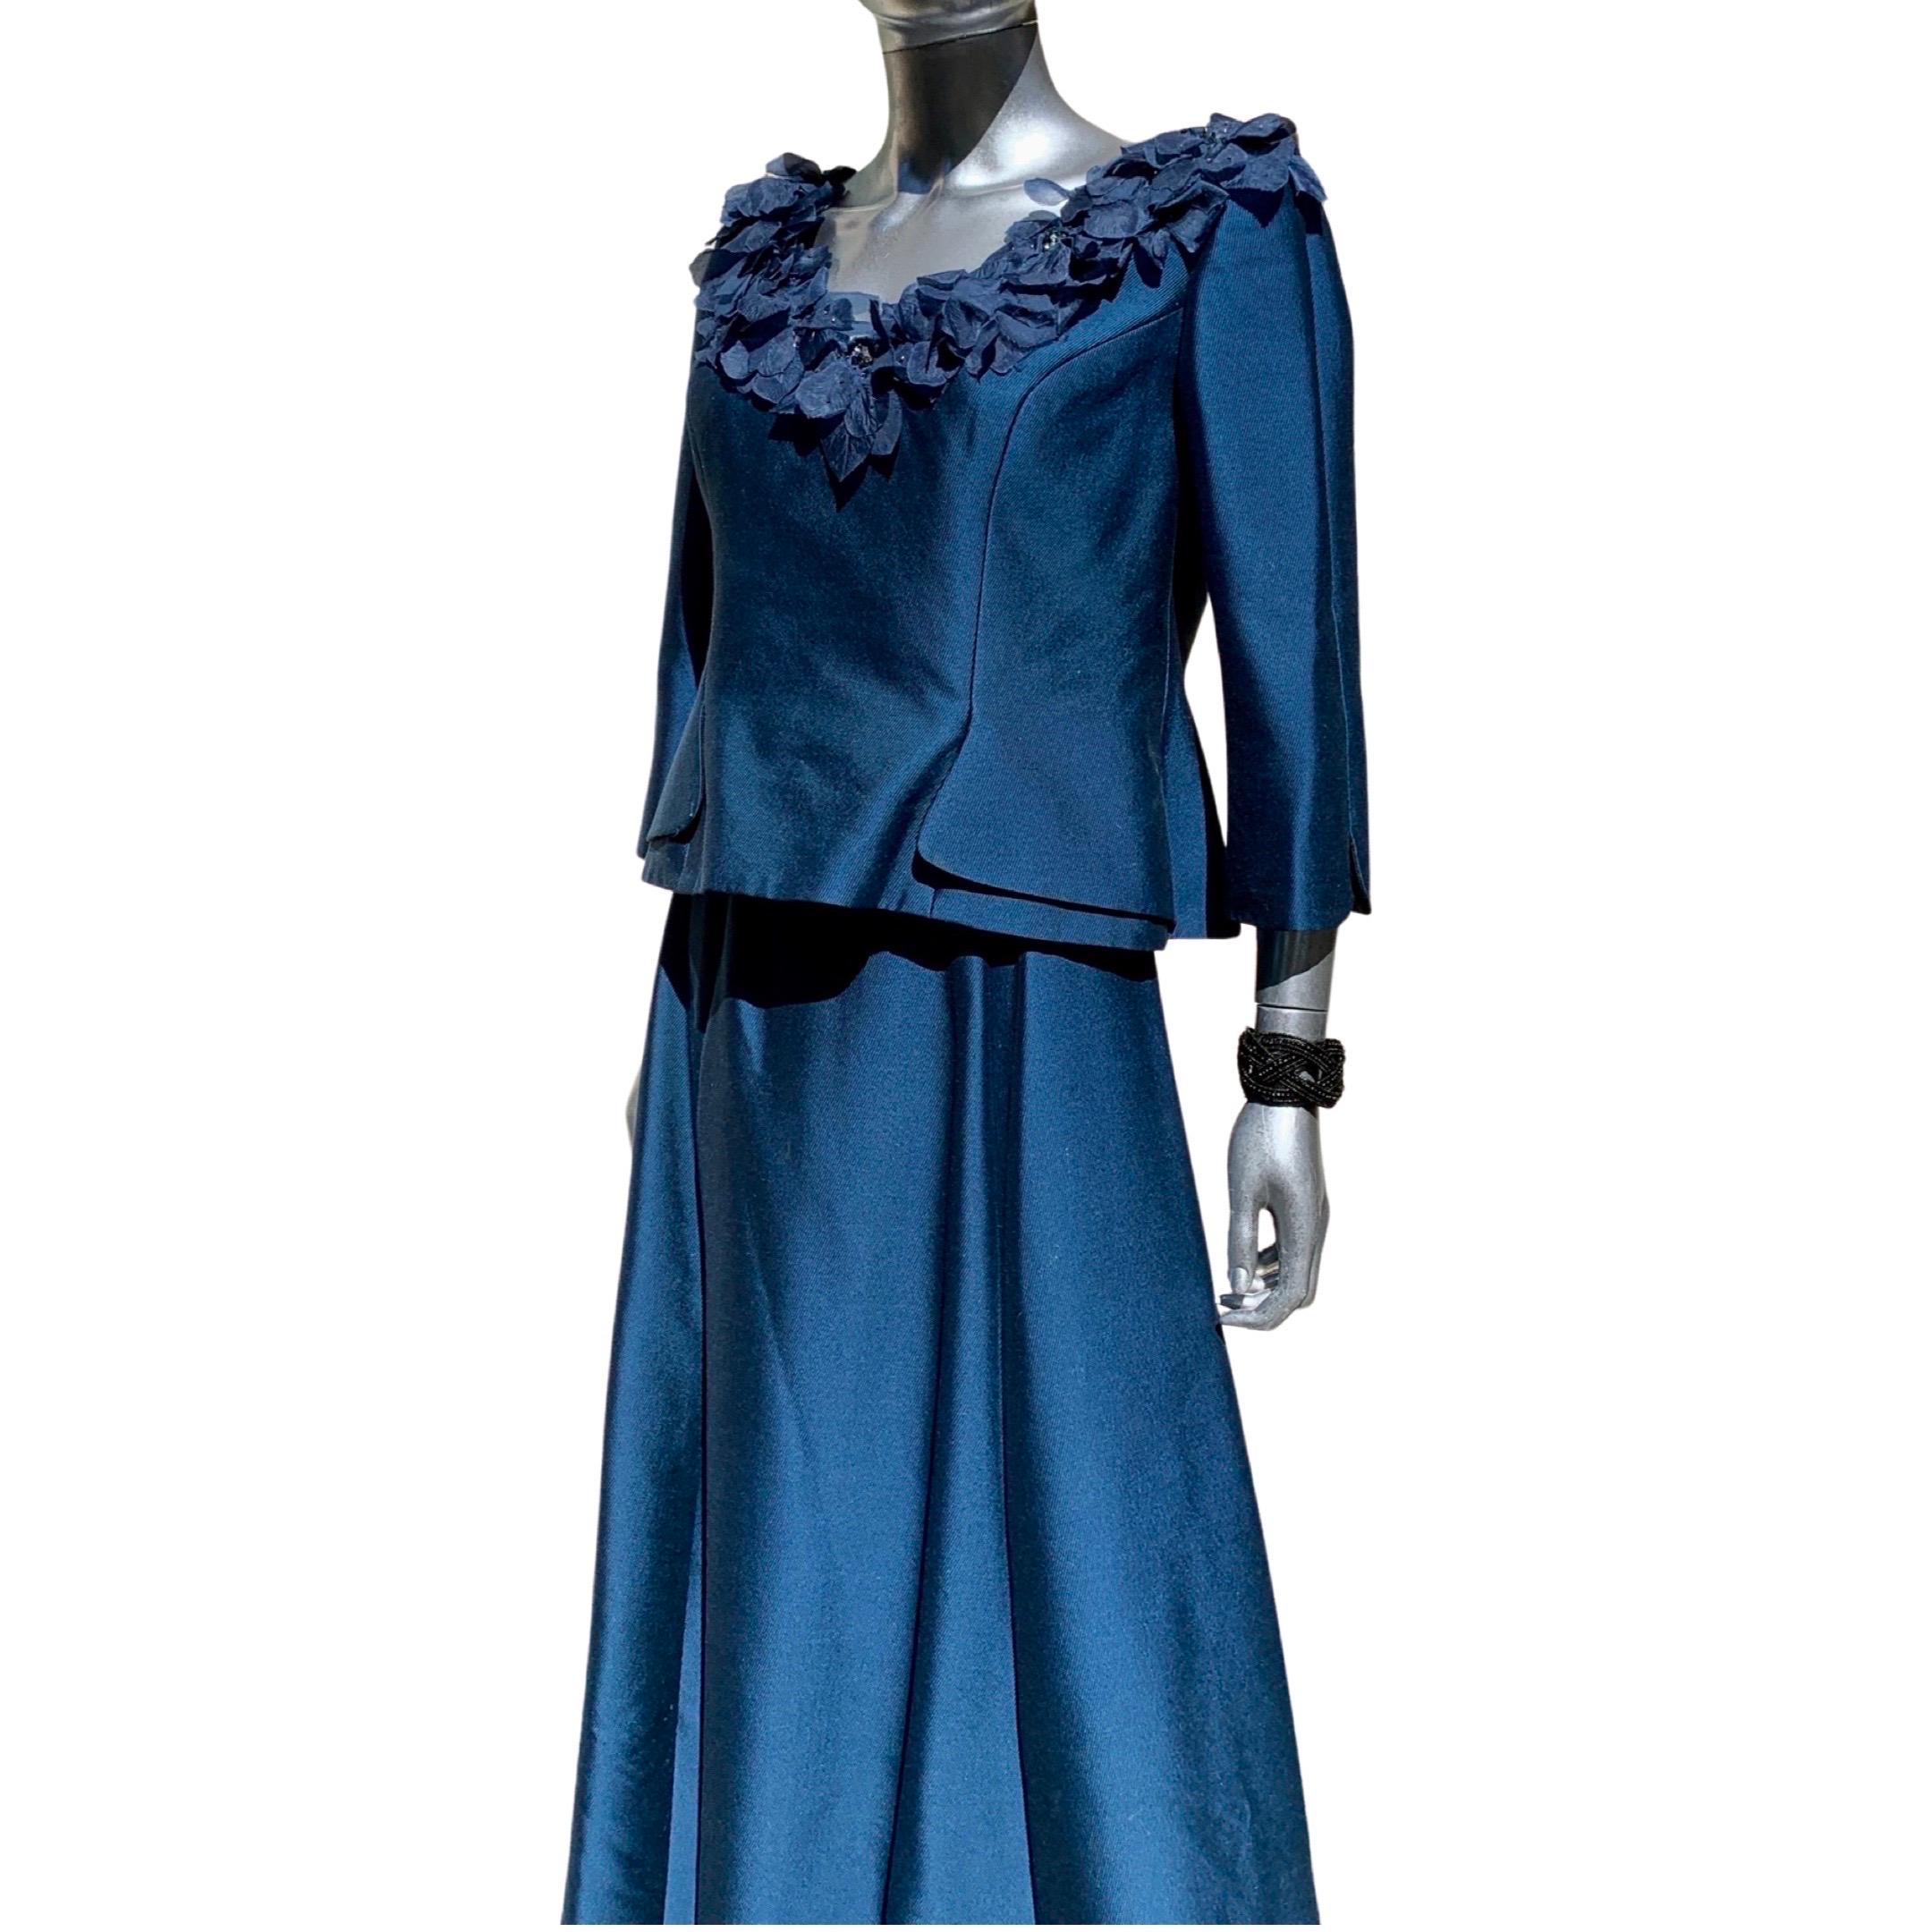 Three Piece Saphire Blue Couture Evening Ensemble by Lily Samii SF Size 8 For Sale 11